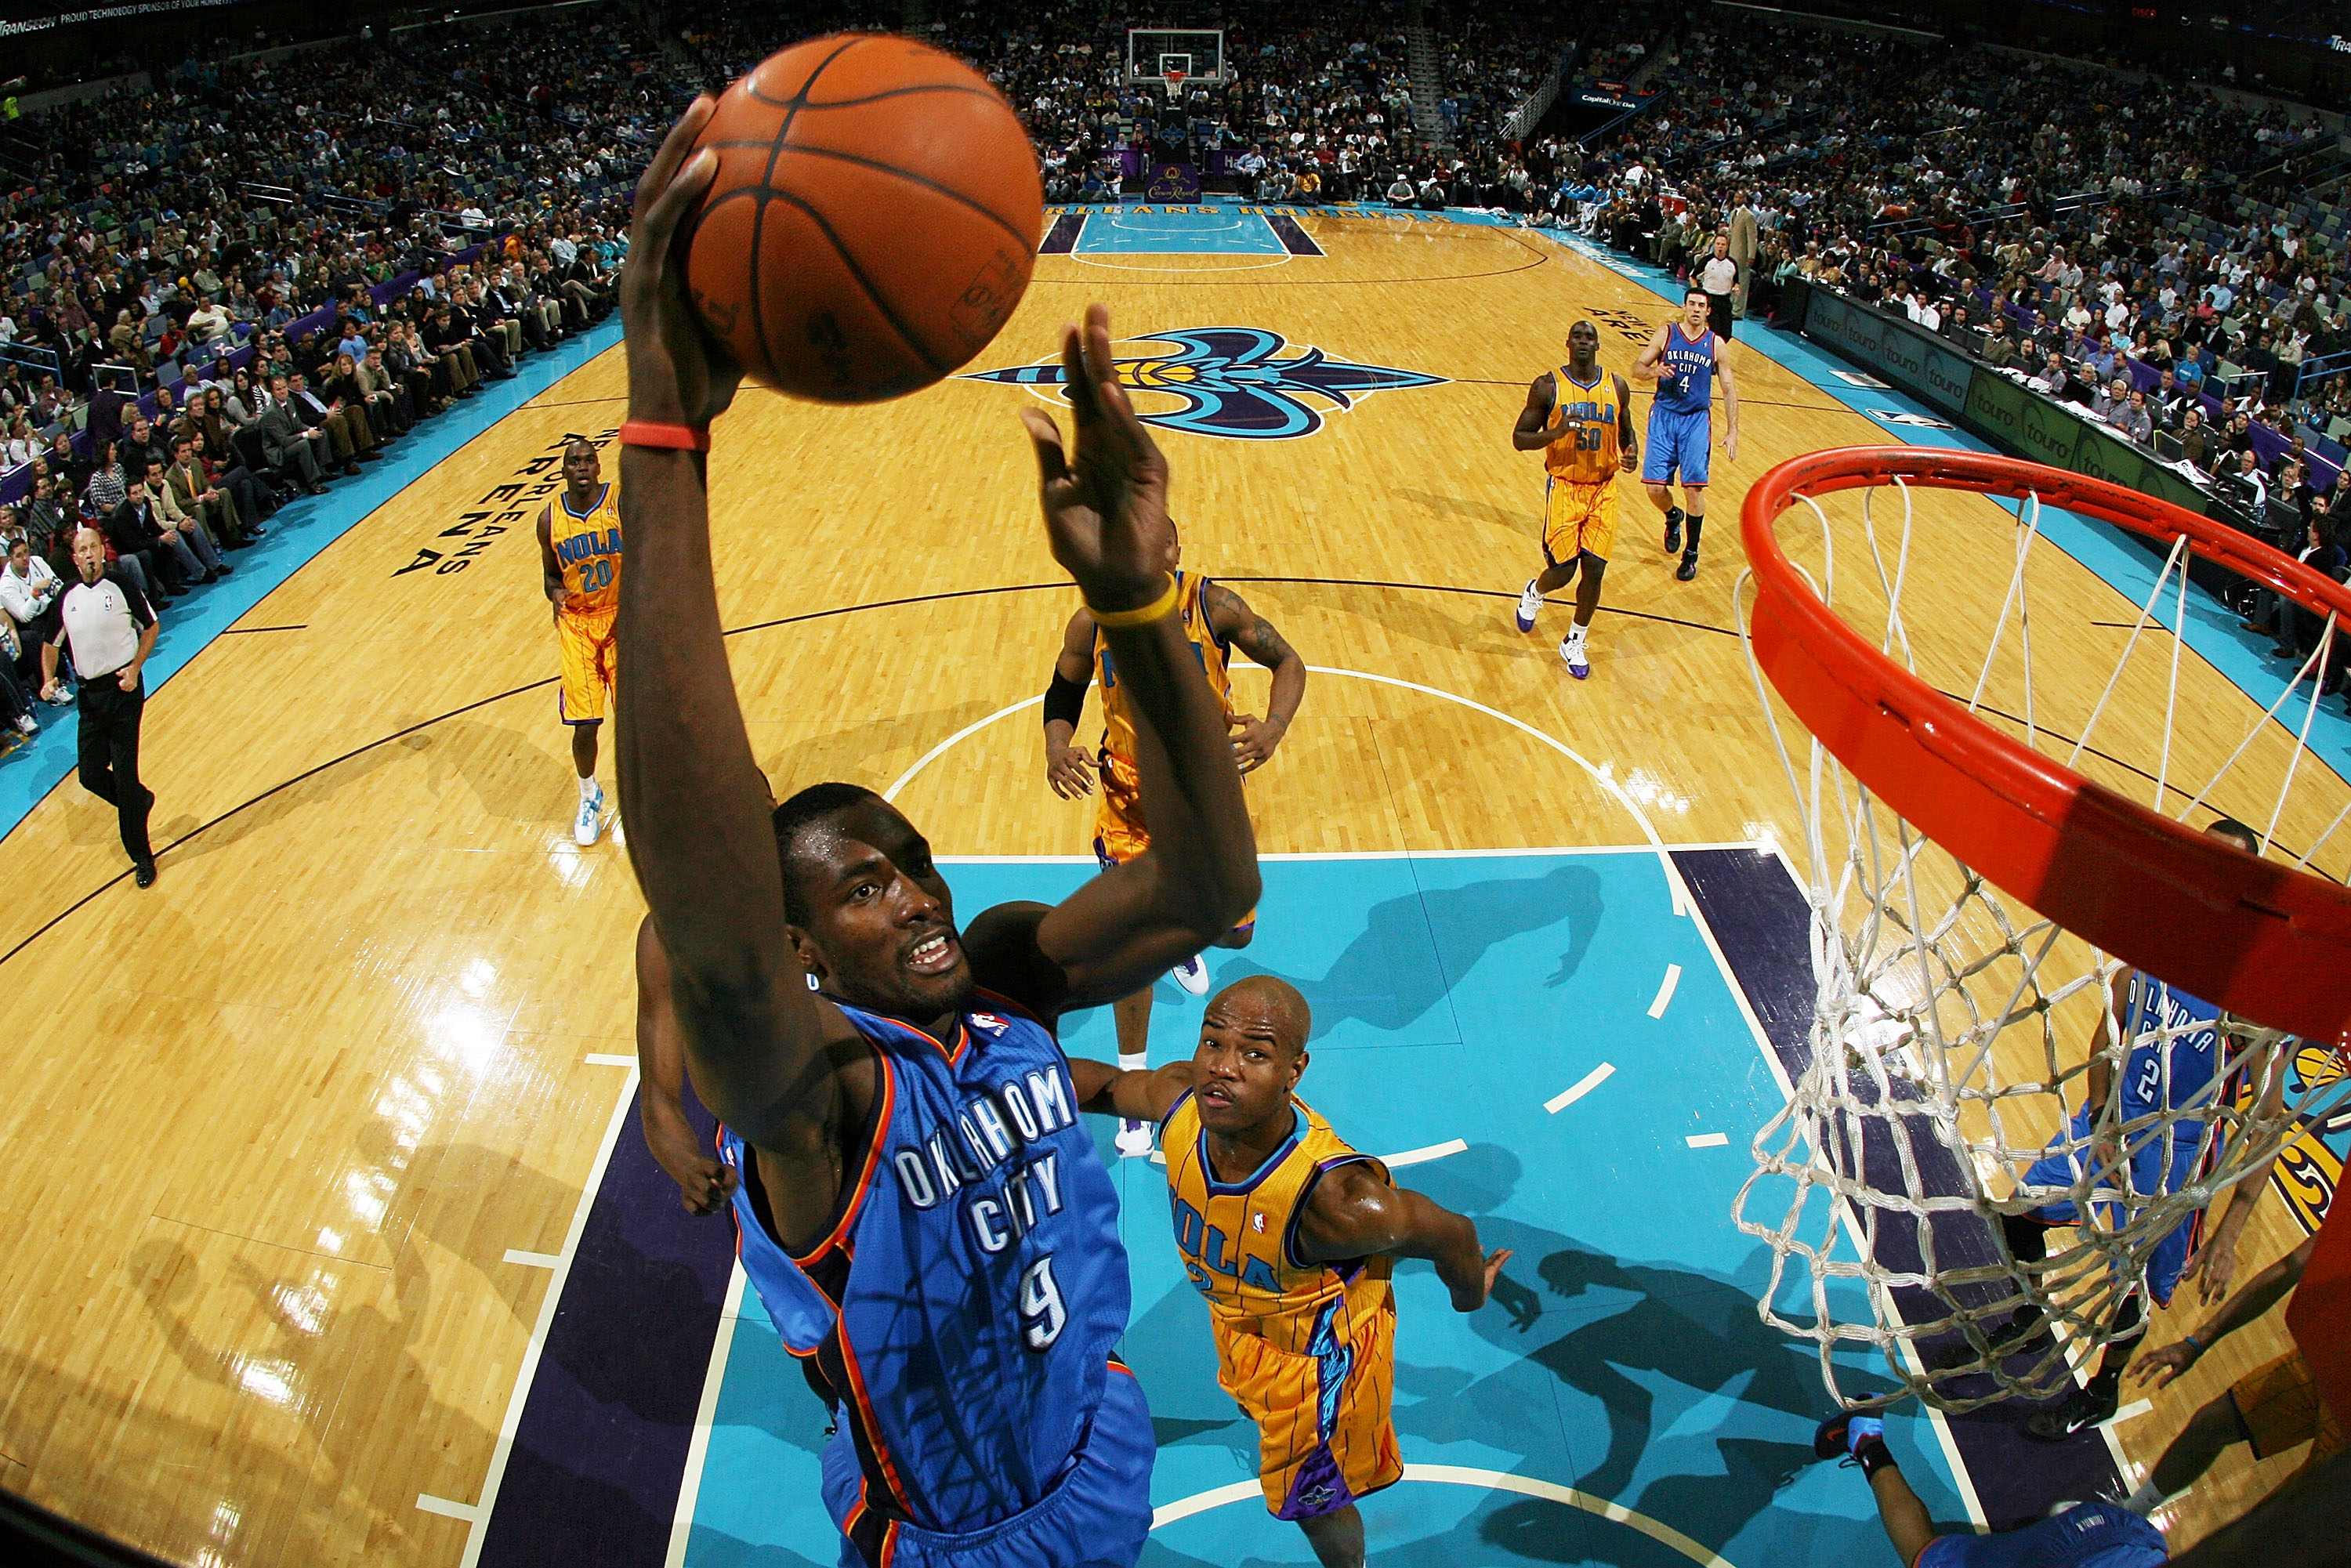 NEW ORLEANS, LA - DECEMBER 10: Serge Ibaka #9  of the Oklahoma City Thunder dunks the ball over Jarrett Jack #2 of the New Orleans Hornets at New Orleans Arena on December 10, 2010 in New Orleans, Louisiana.    NOTE TO USER: User expressly acknowledges an